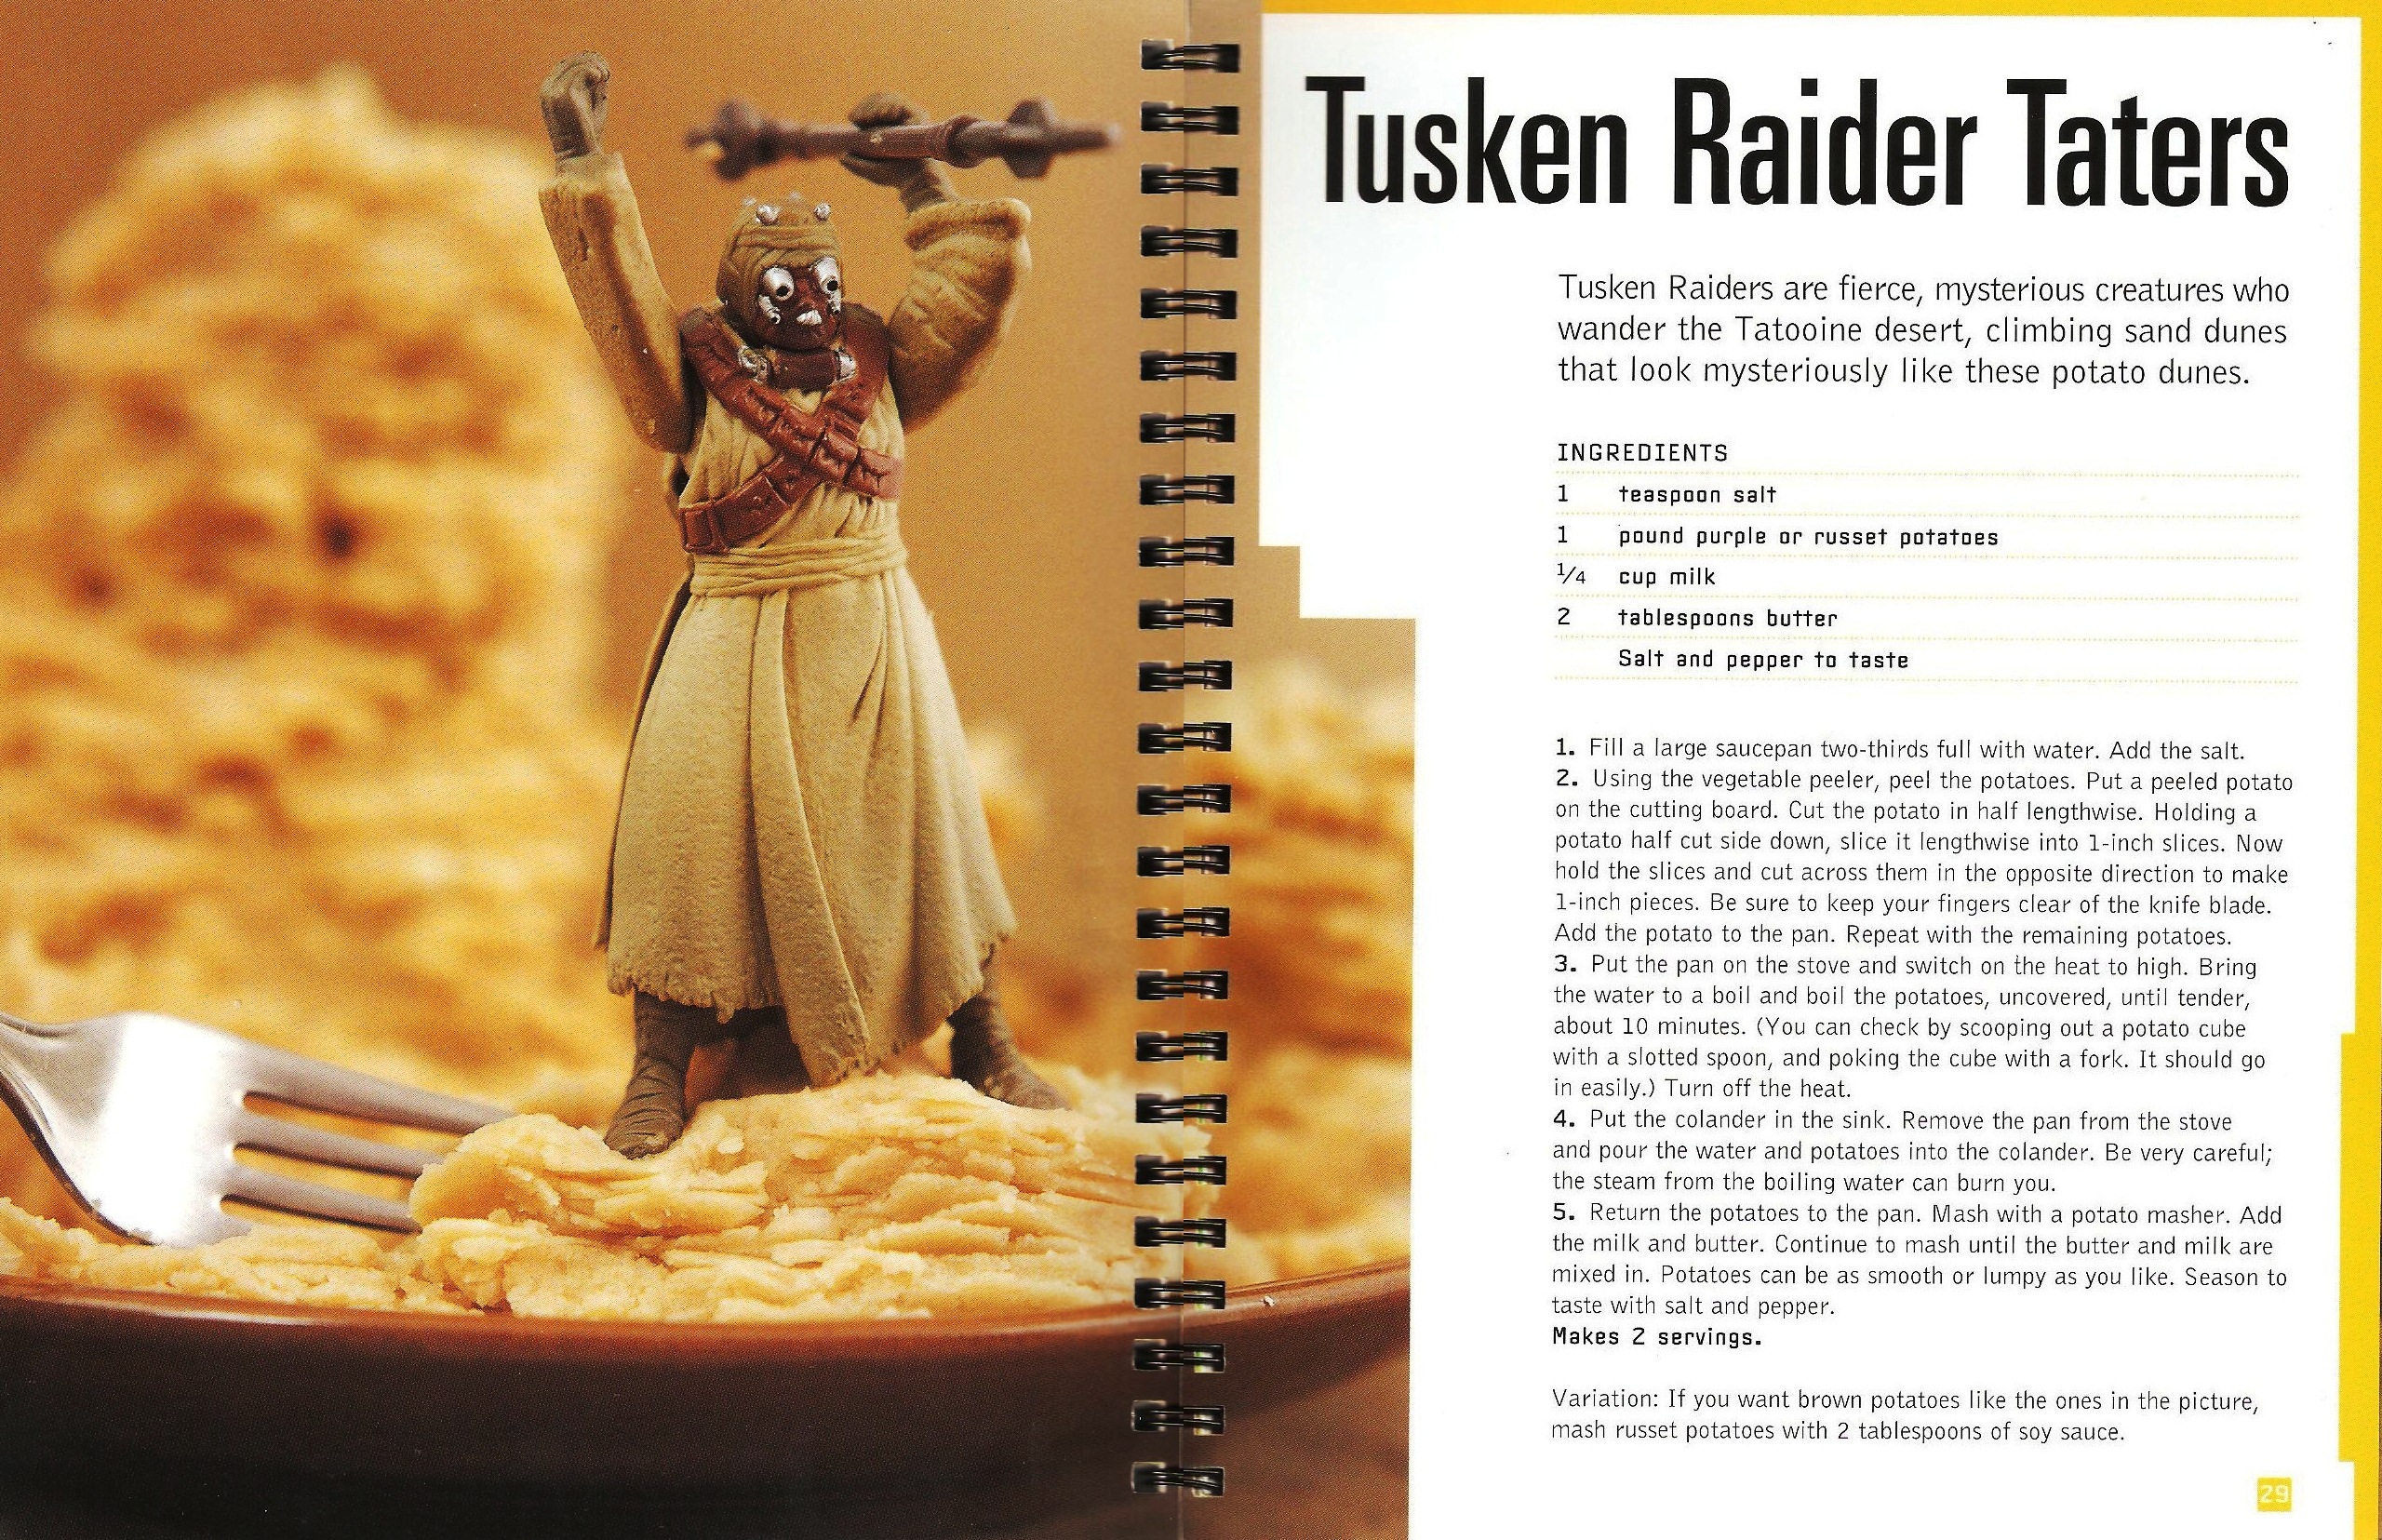 From The Star Wars Cookbook: Wookie Cookies and Other Galactic Recipes (1998)